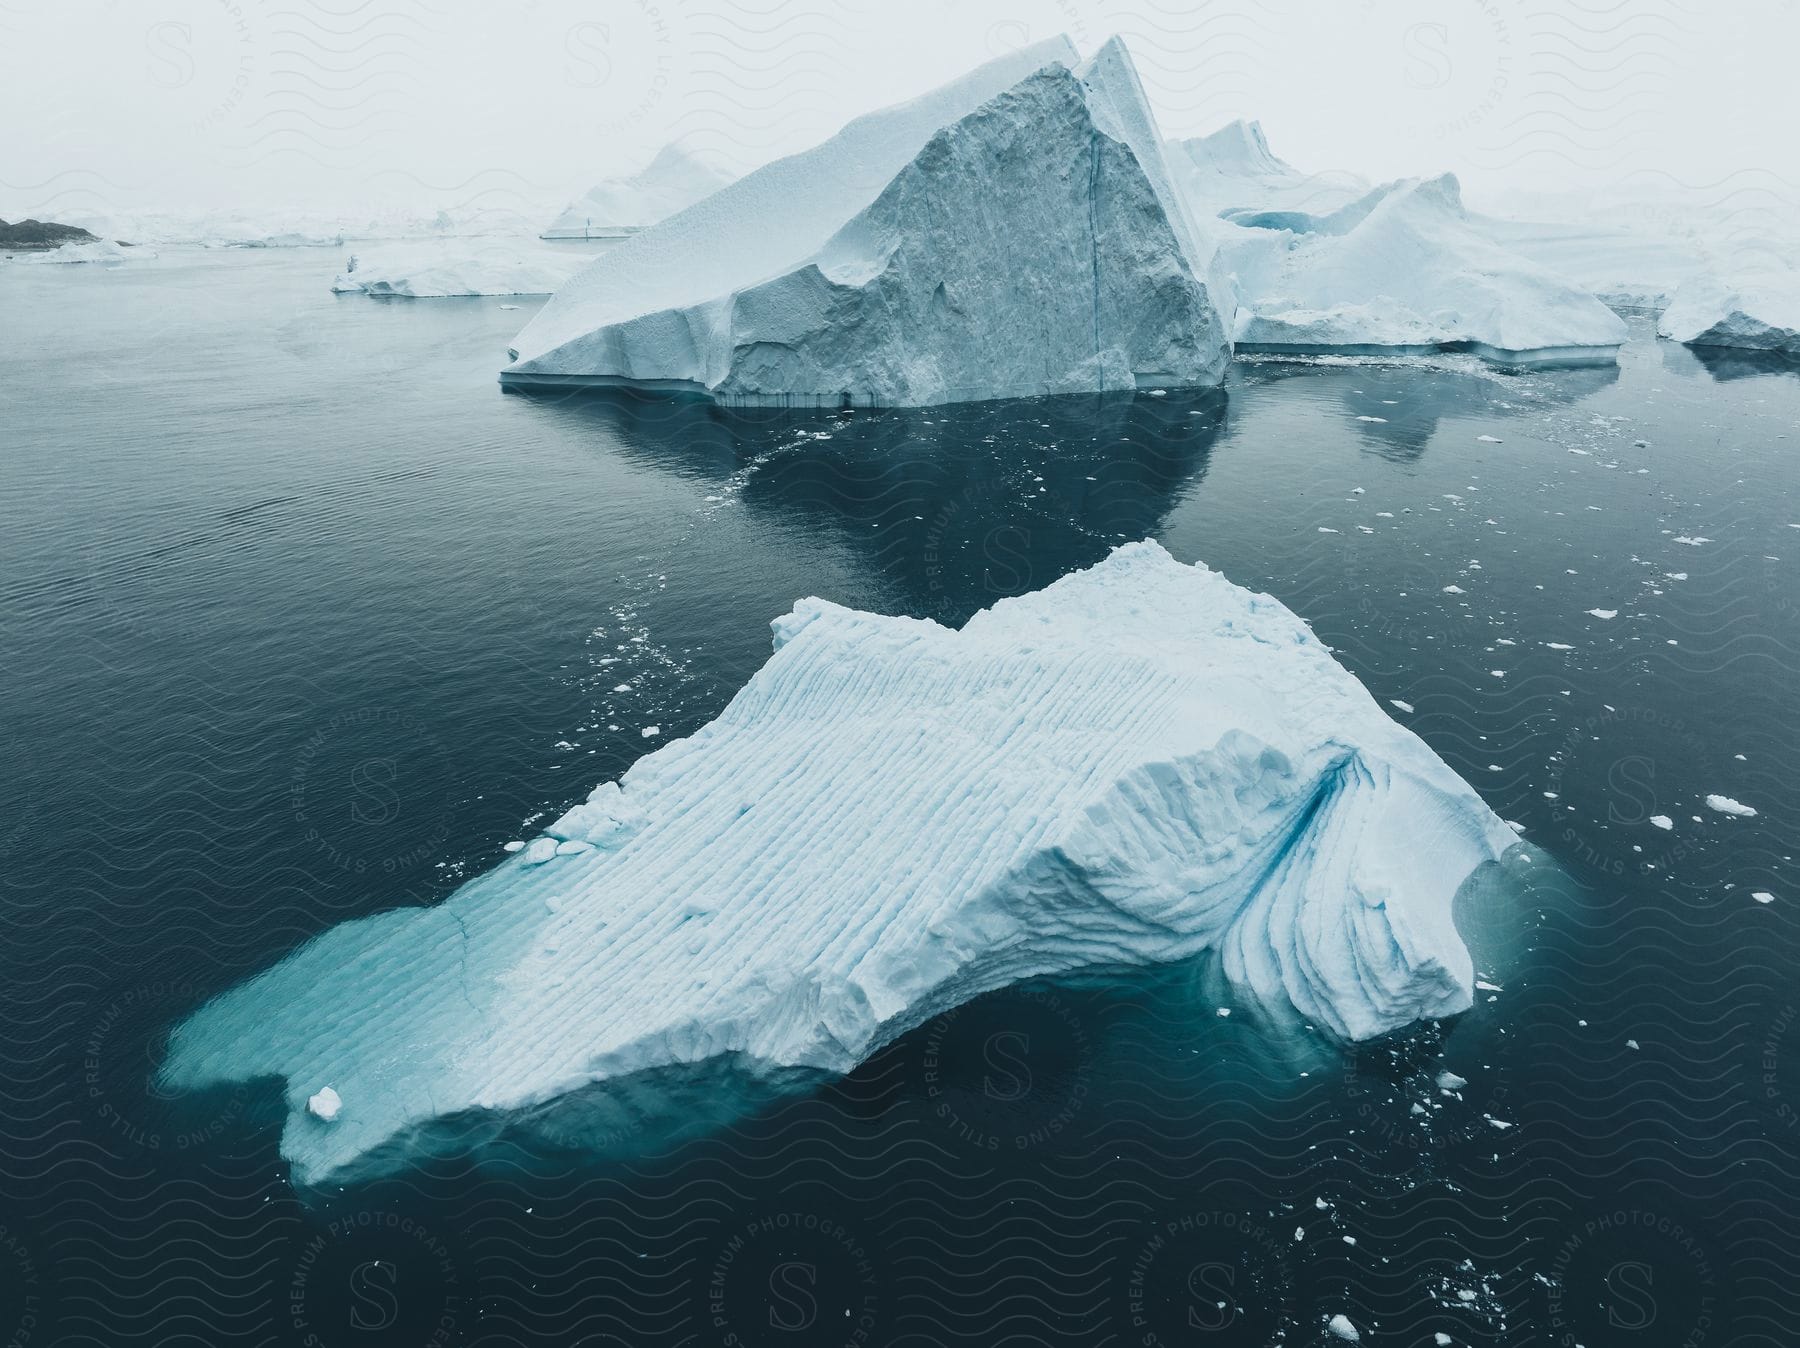 Icebergs and pieces of ice float in arctic water under a white hazy sky